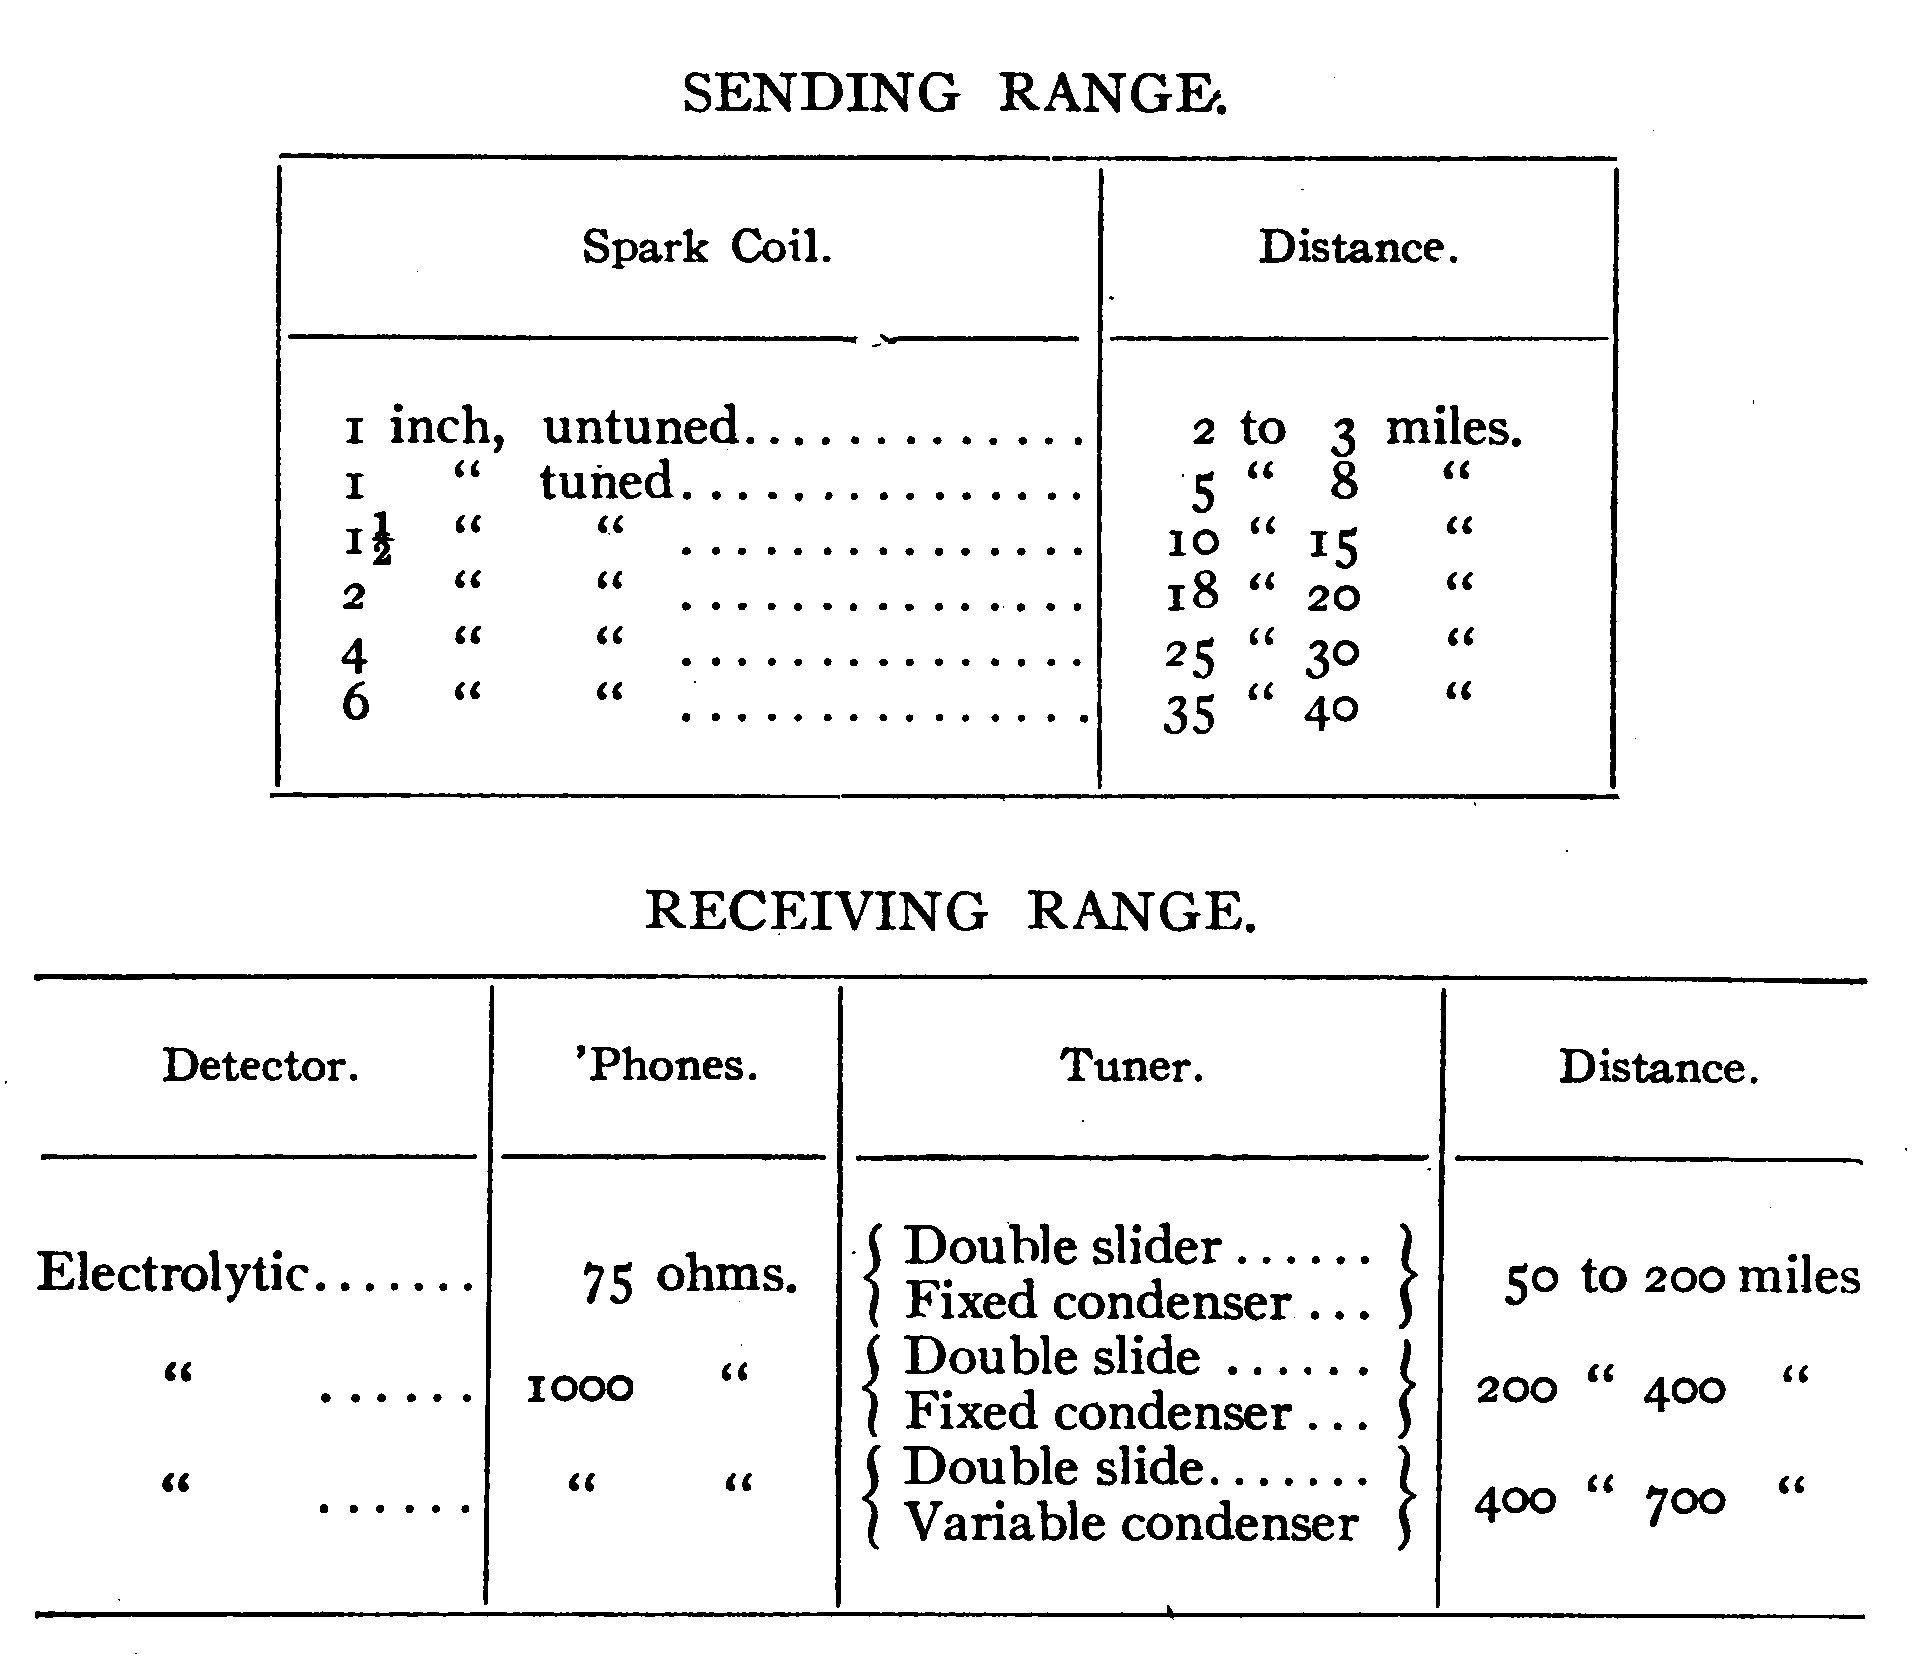 Sending and Receiving Range Tables